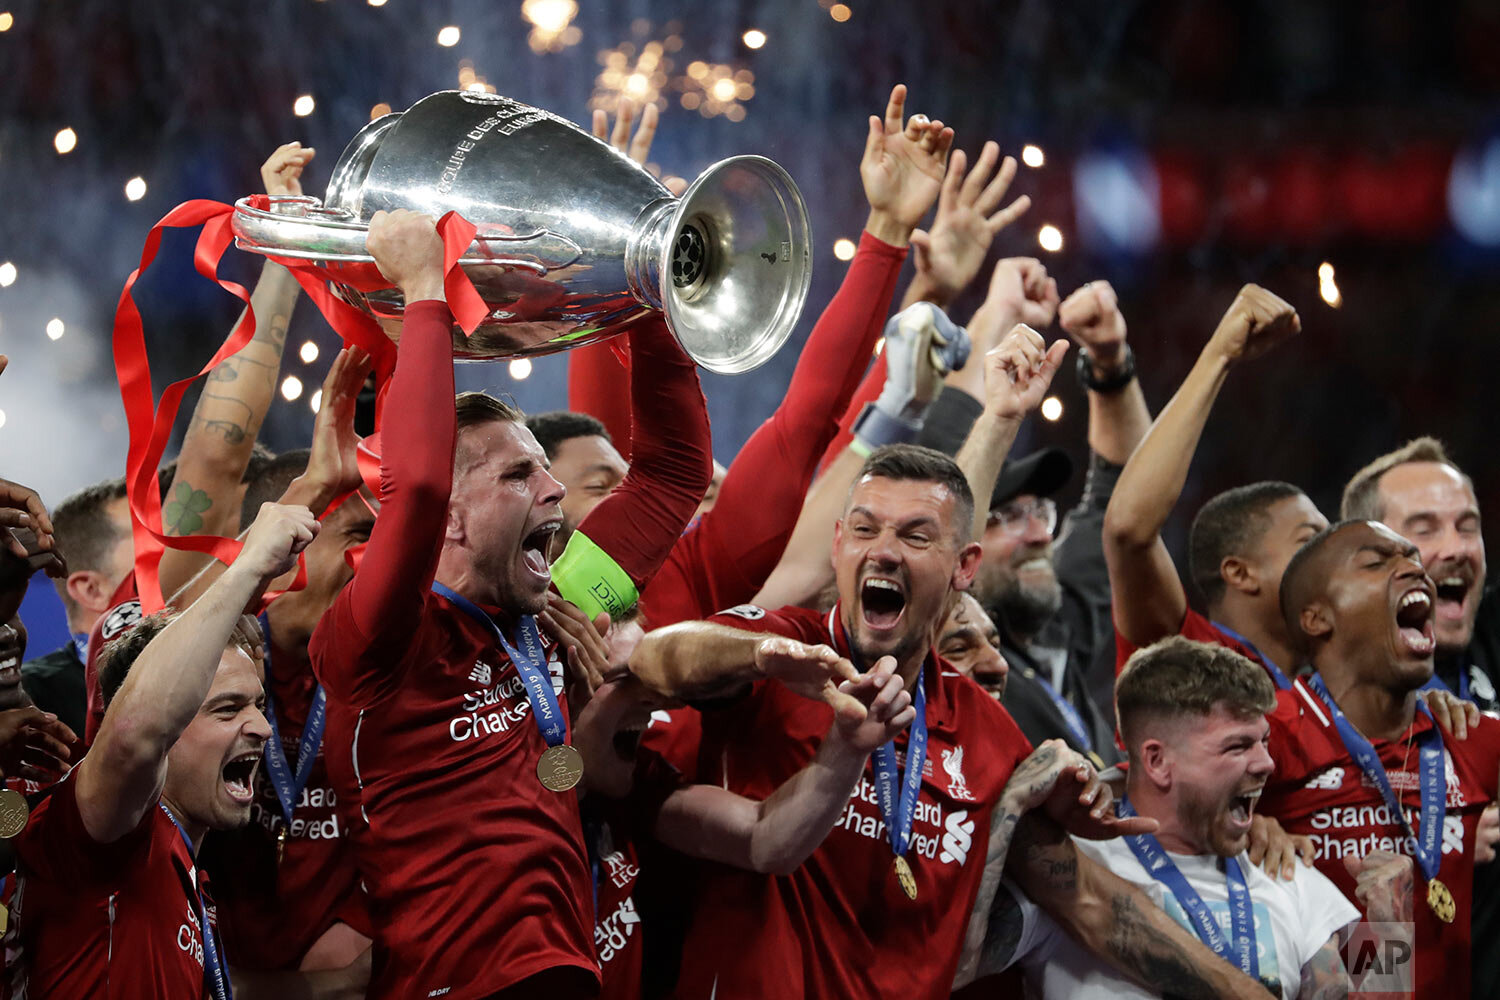  Liverpool's players celebrate with the trophy after winning the Champions League final soccer match between Tottenham Hotspur and Liverpool at the Wanda Metropolitano Stadium in Madrid on June 2, 2019. (AP Photo/Felipe Dana) 